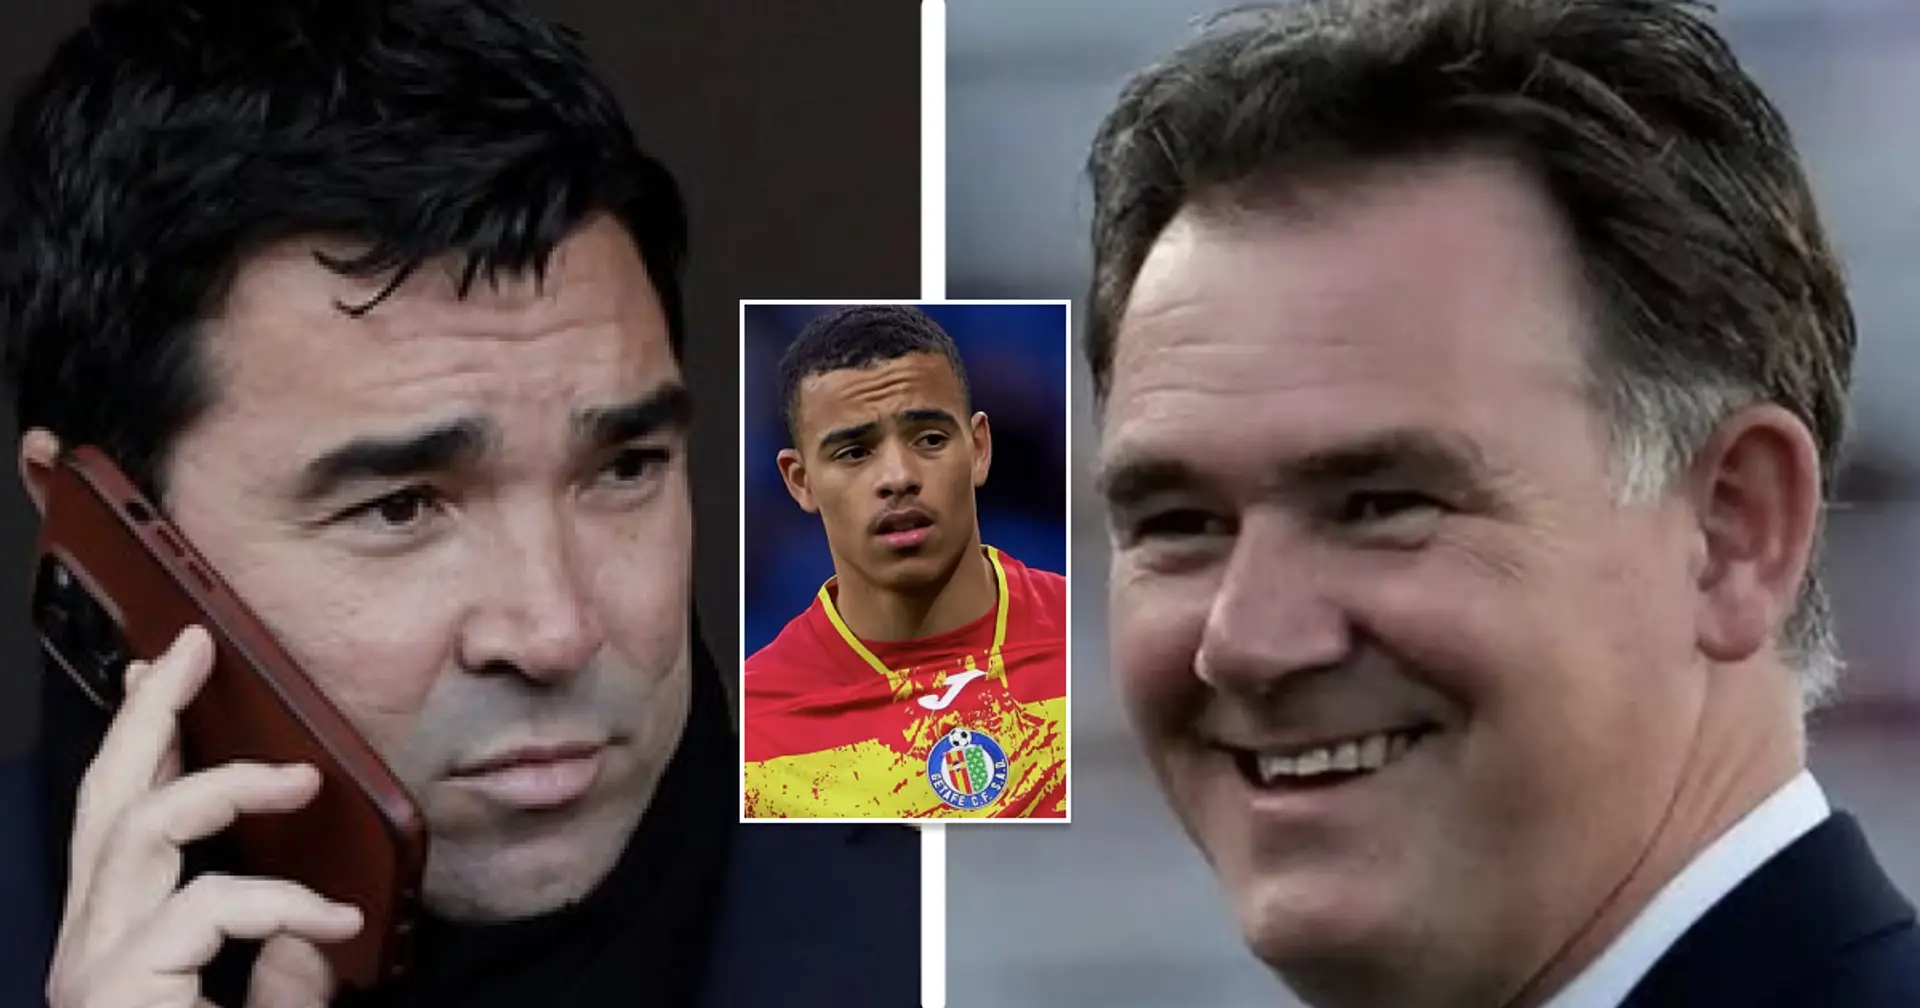 Deco meets Man United director: Mason Greenwood and 7 more players they could discuss